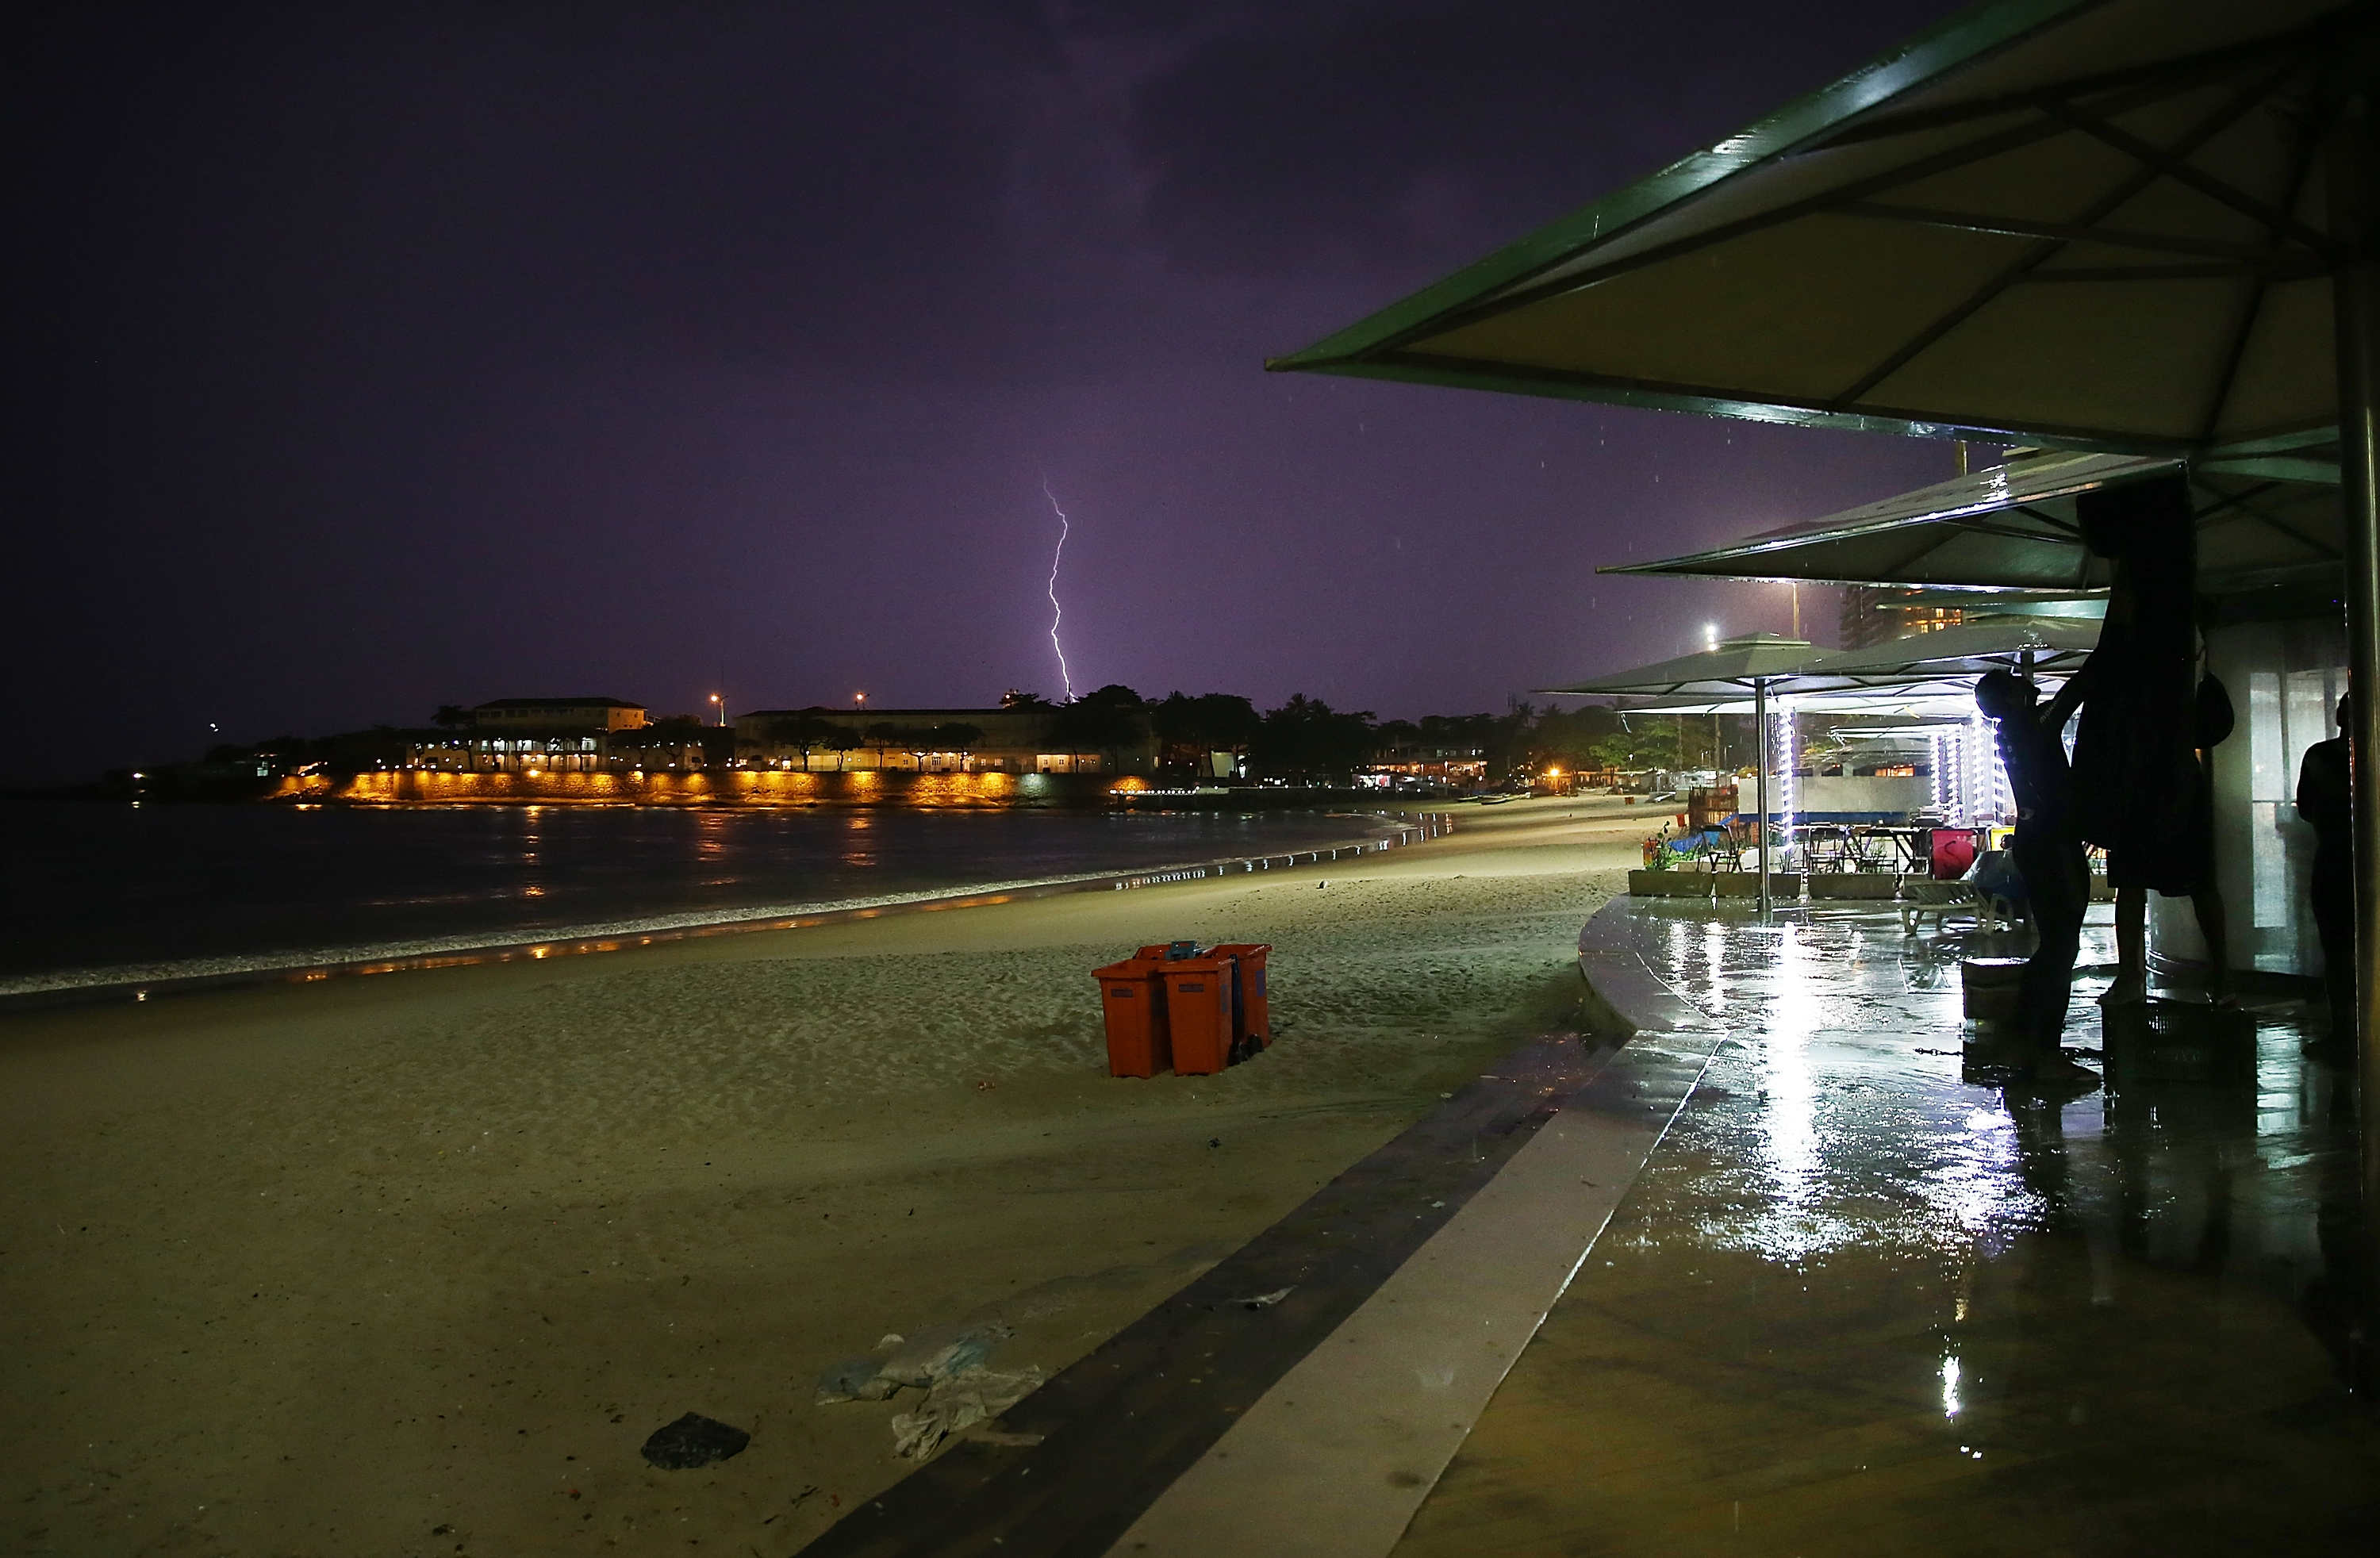 A worker stands beneath umbrellas along Copacabana Beach as lightning flashes during a powerful early evening thunderstorm on January 16, 2014 in Rio de Janeiro.